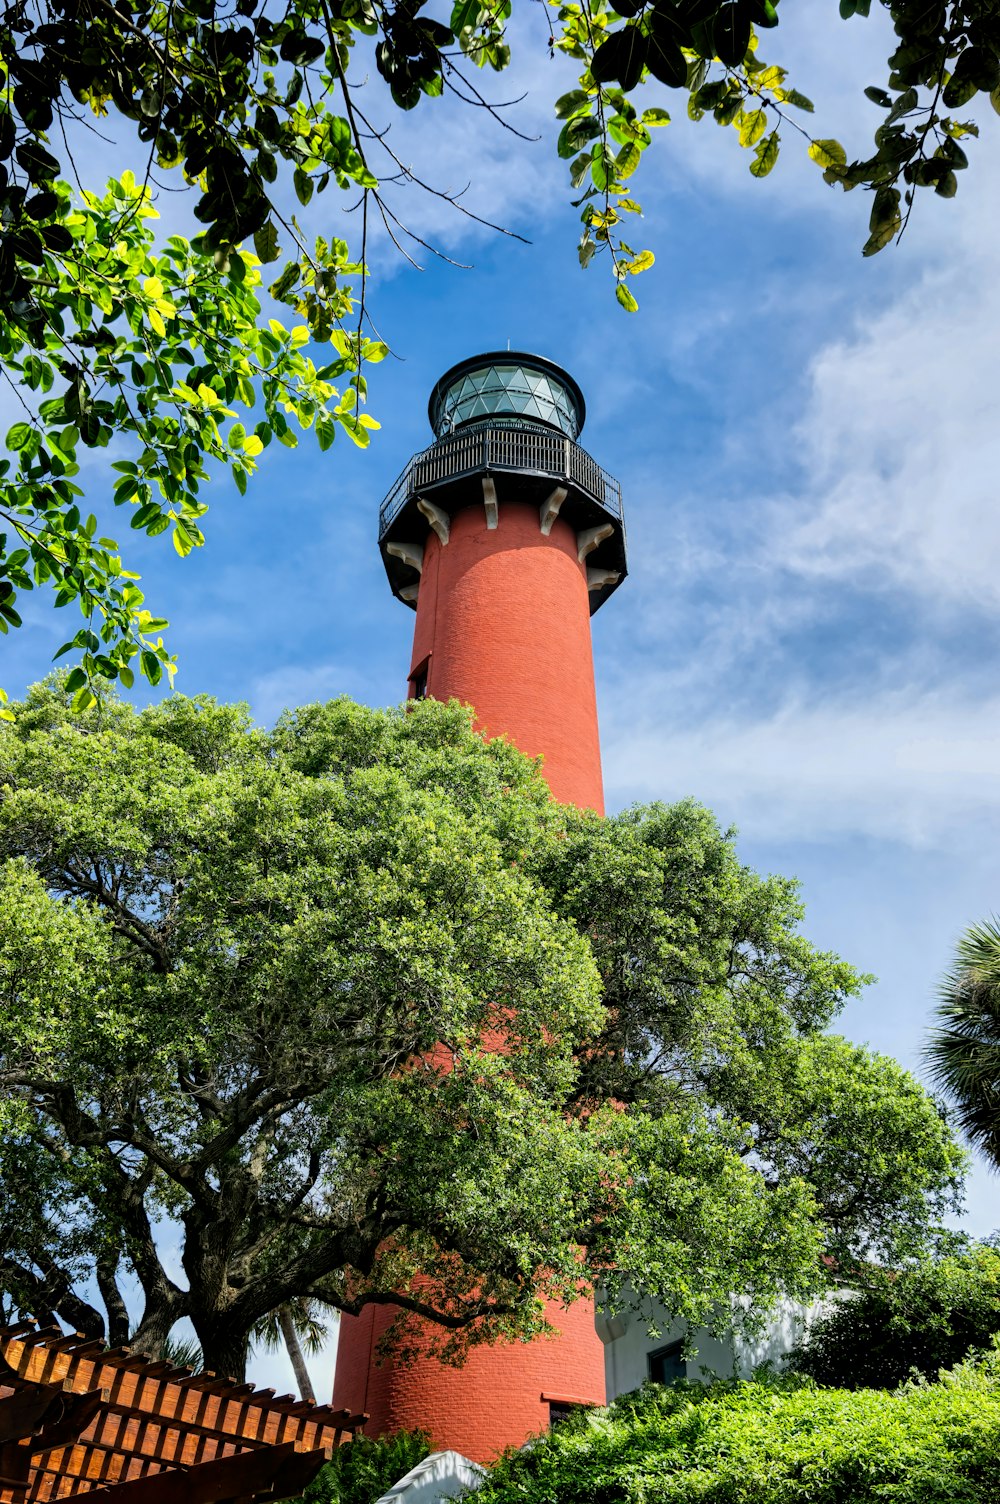 a red light house surrounded by trees and bushes